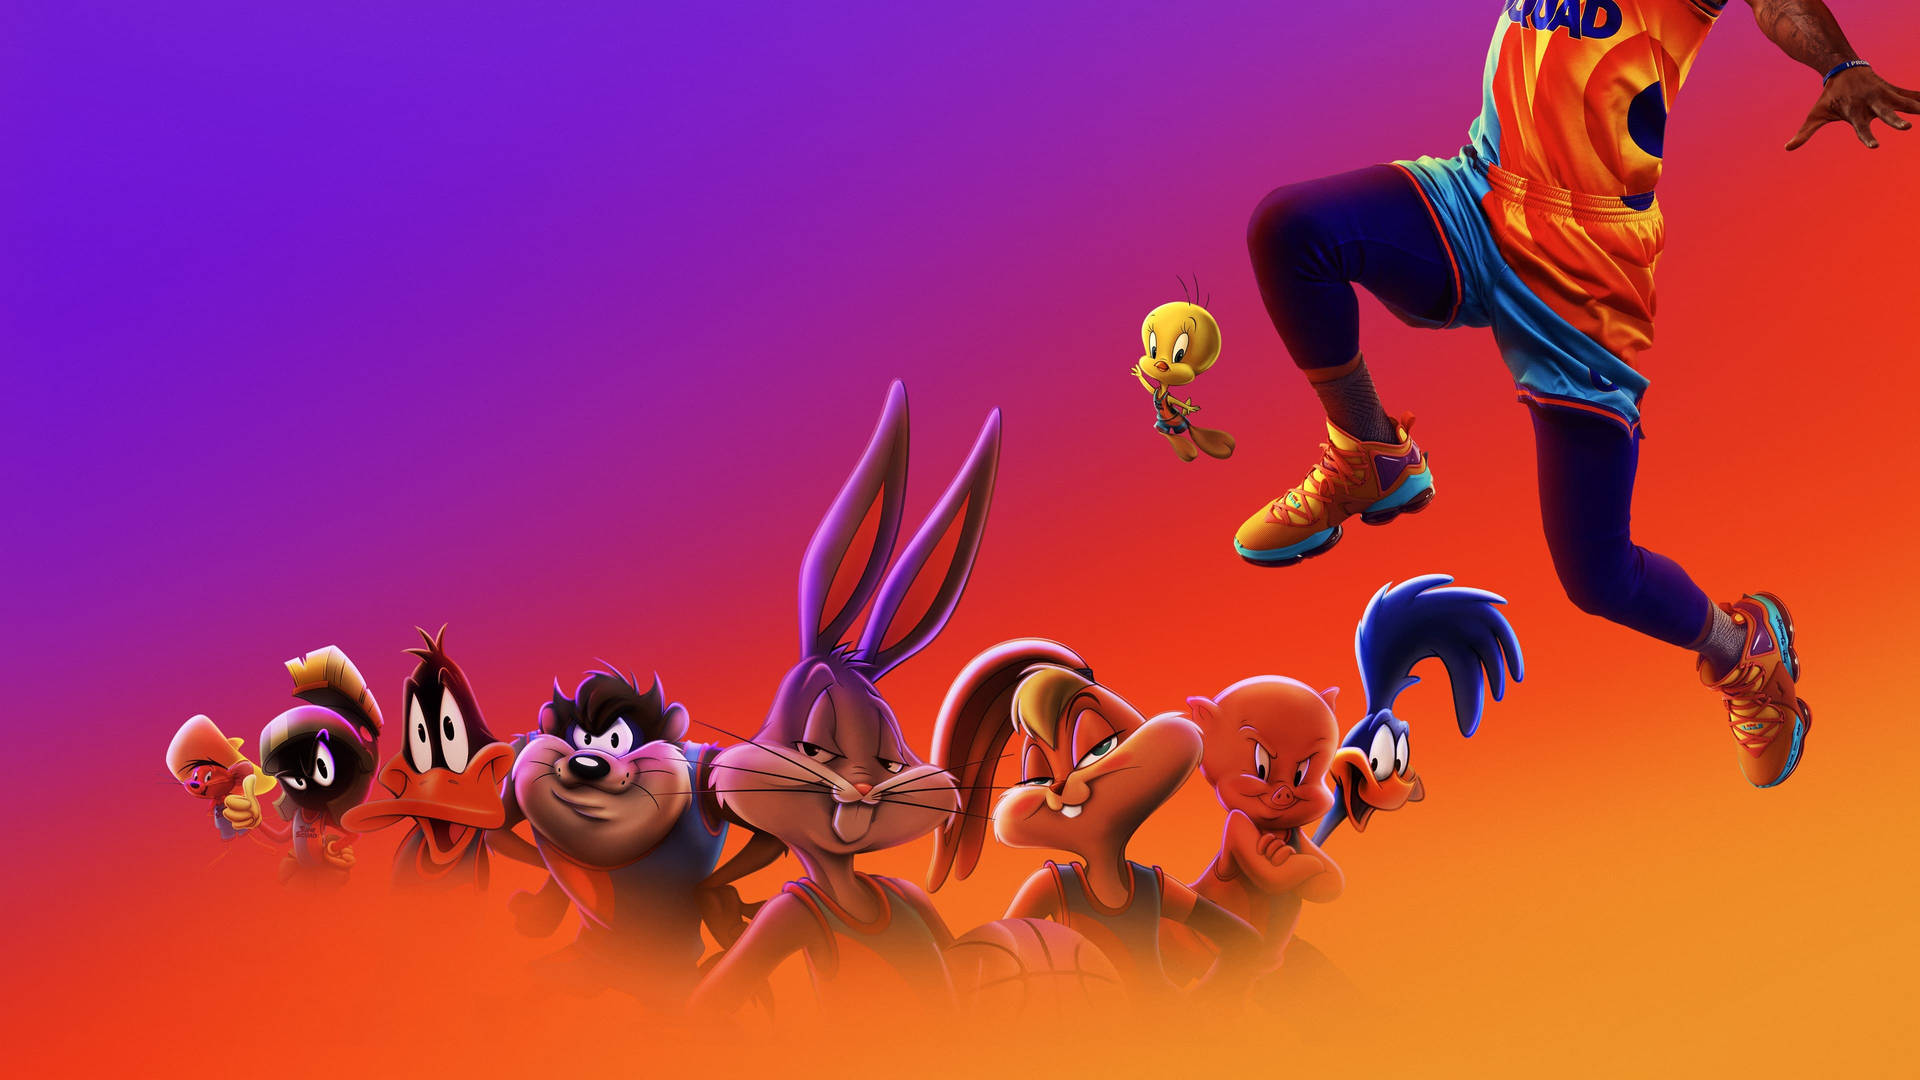 "The Looney Tunes join forces with NBA stars to go up against the Aliens in Space Jam 2!" Wallpaper